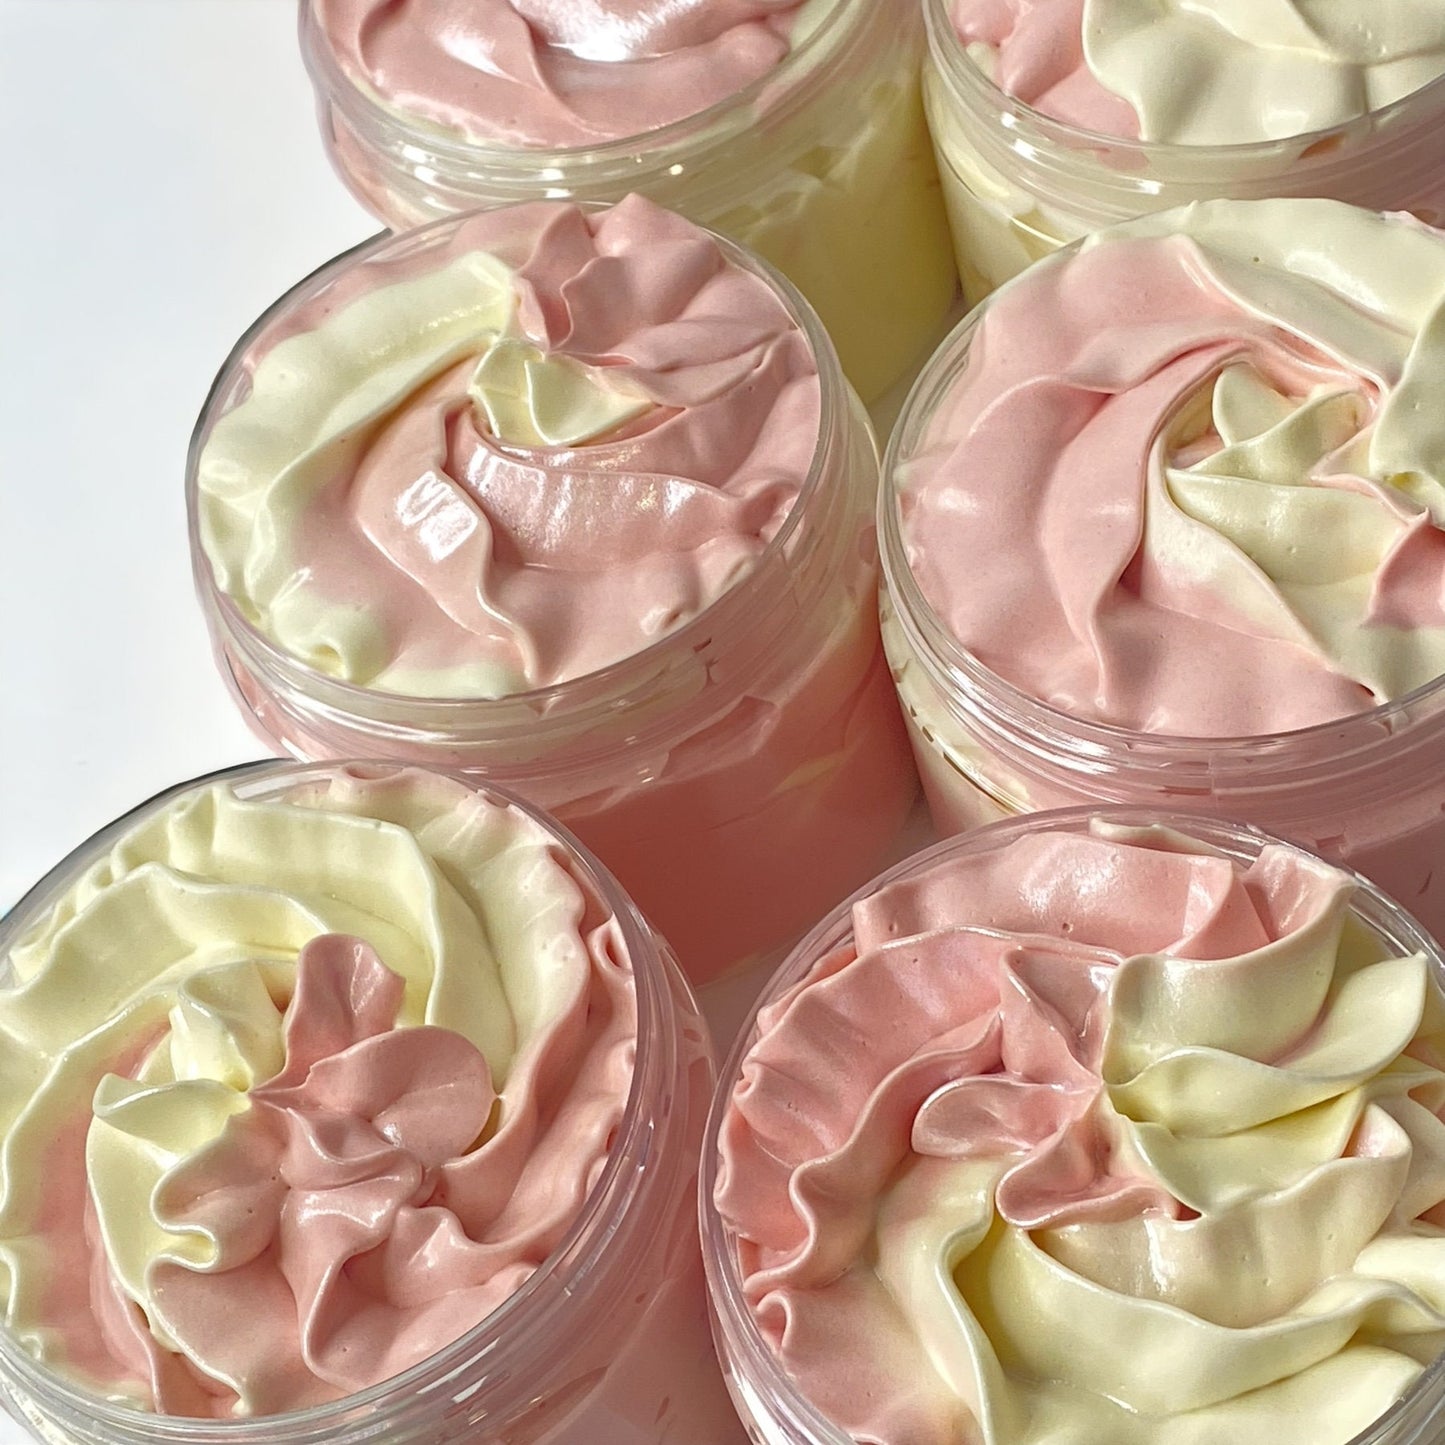 Whipped body butter